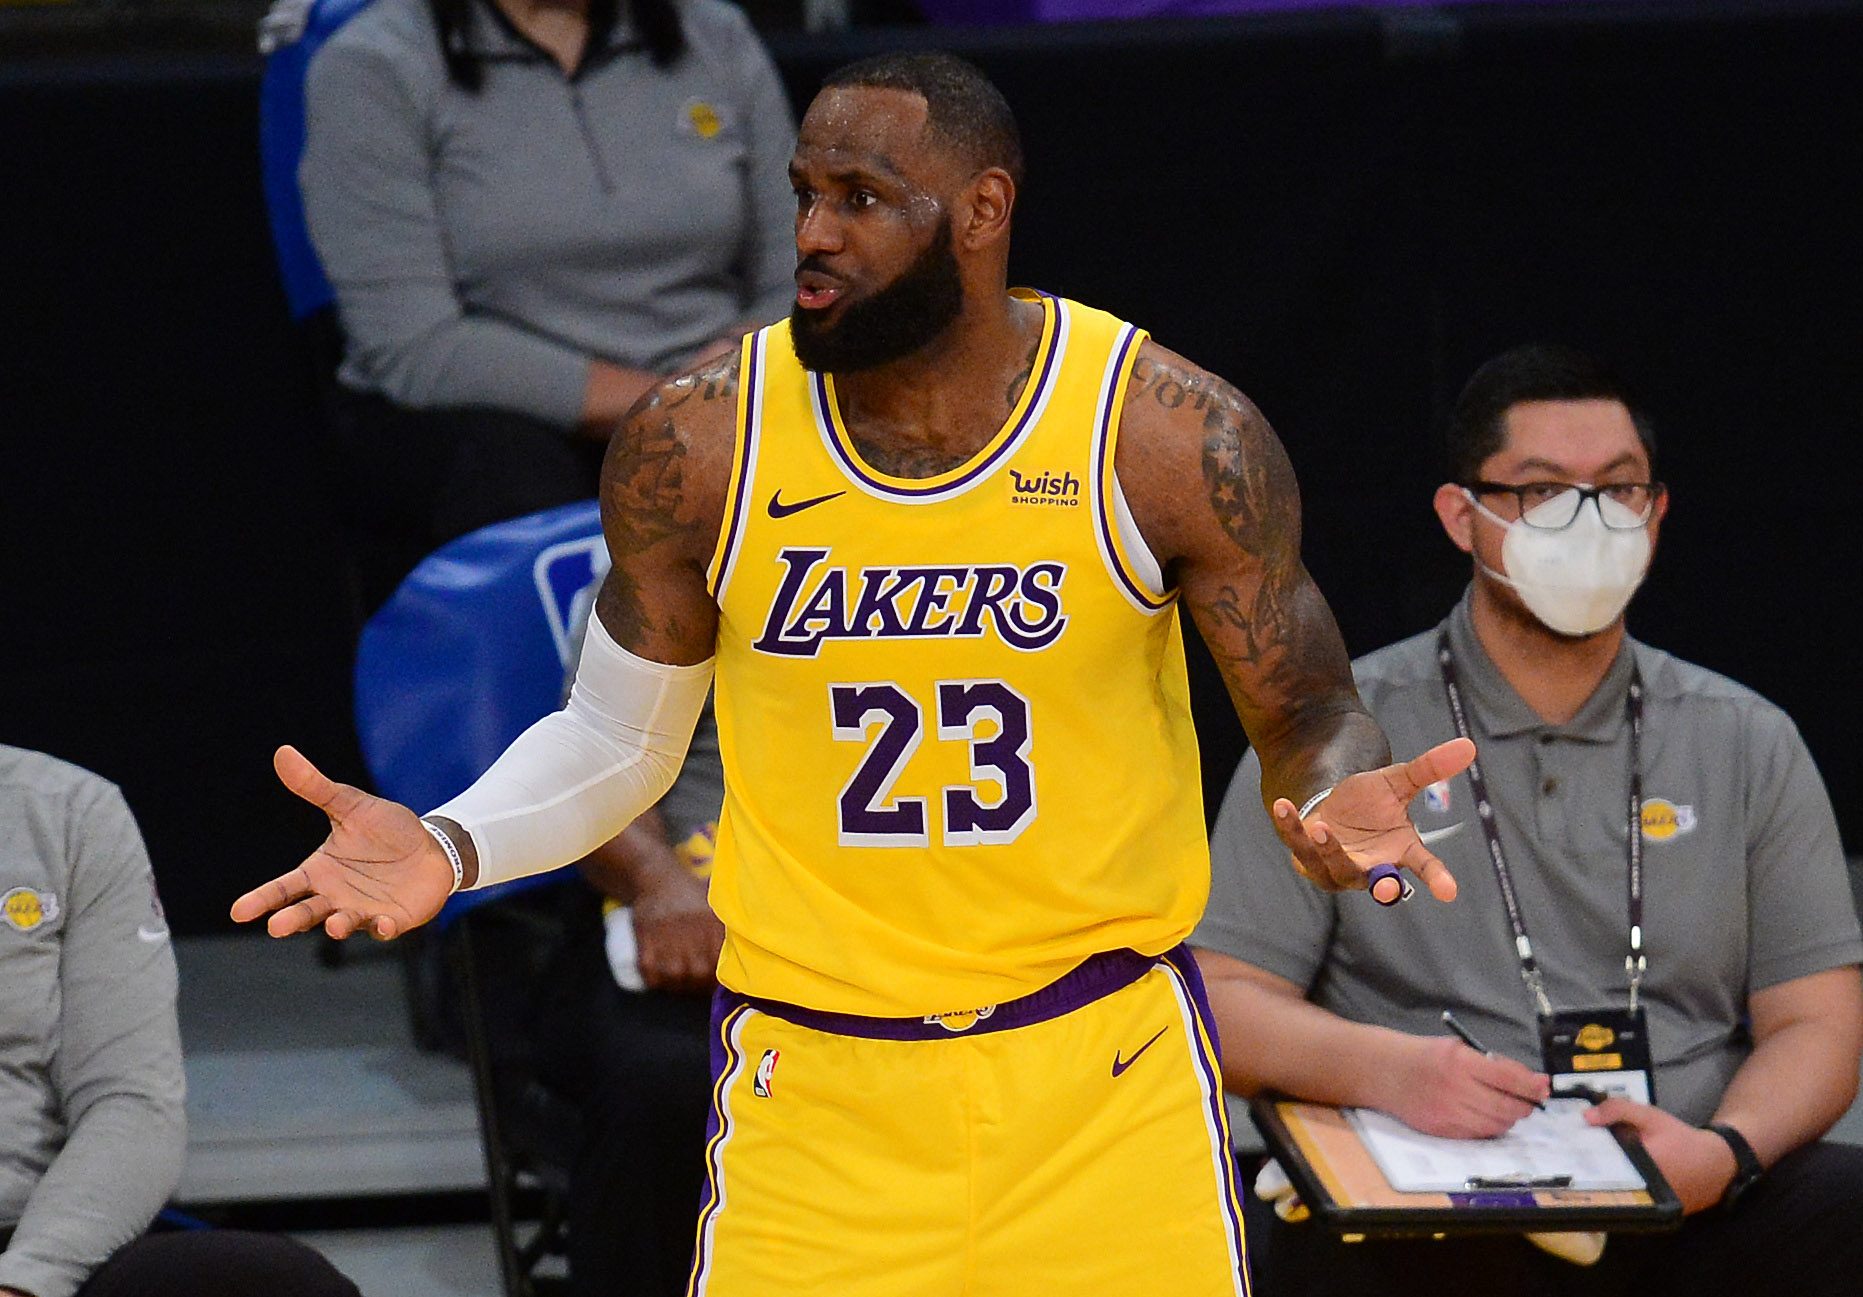 Lakers hope for boost from LeBron James return